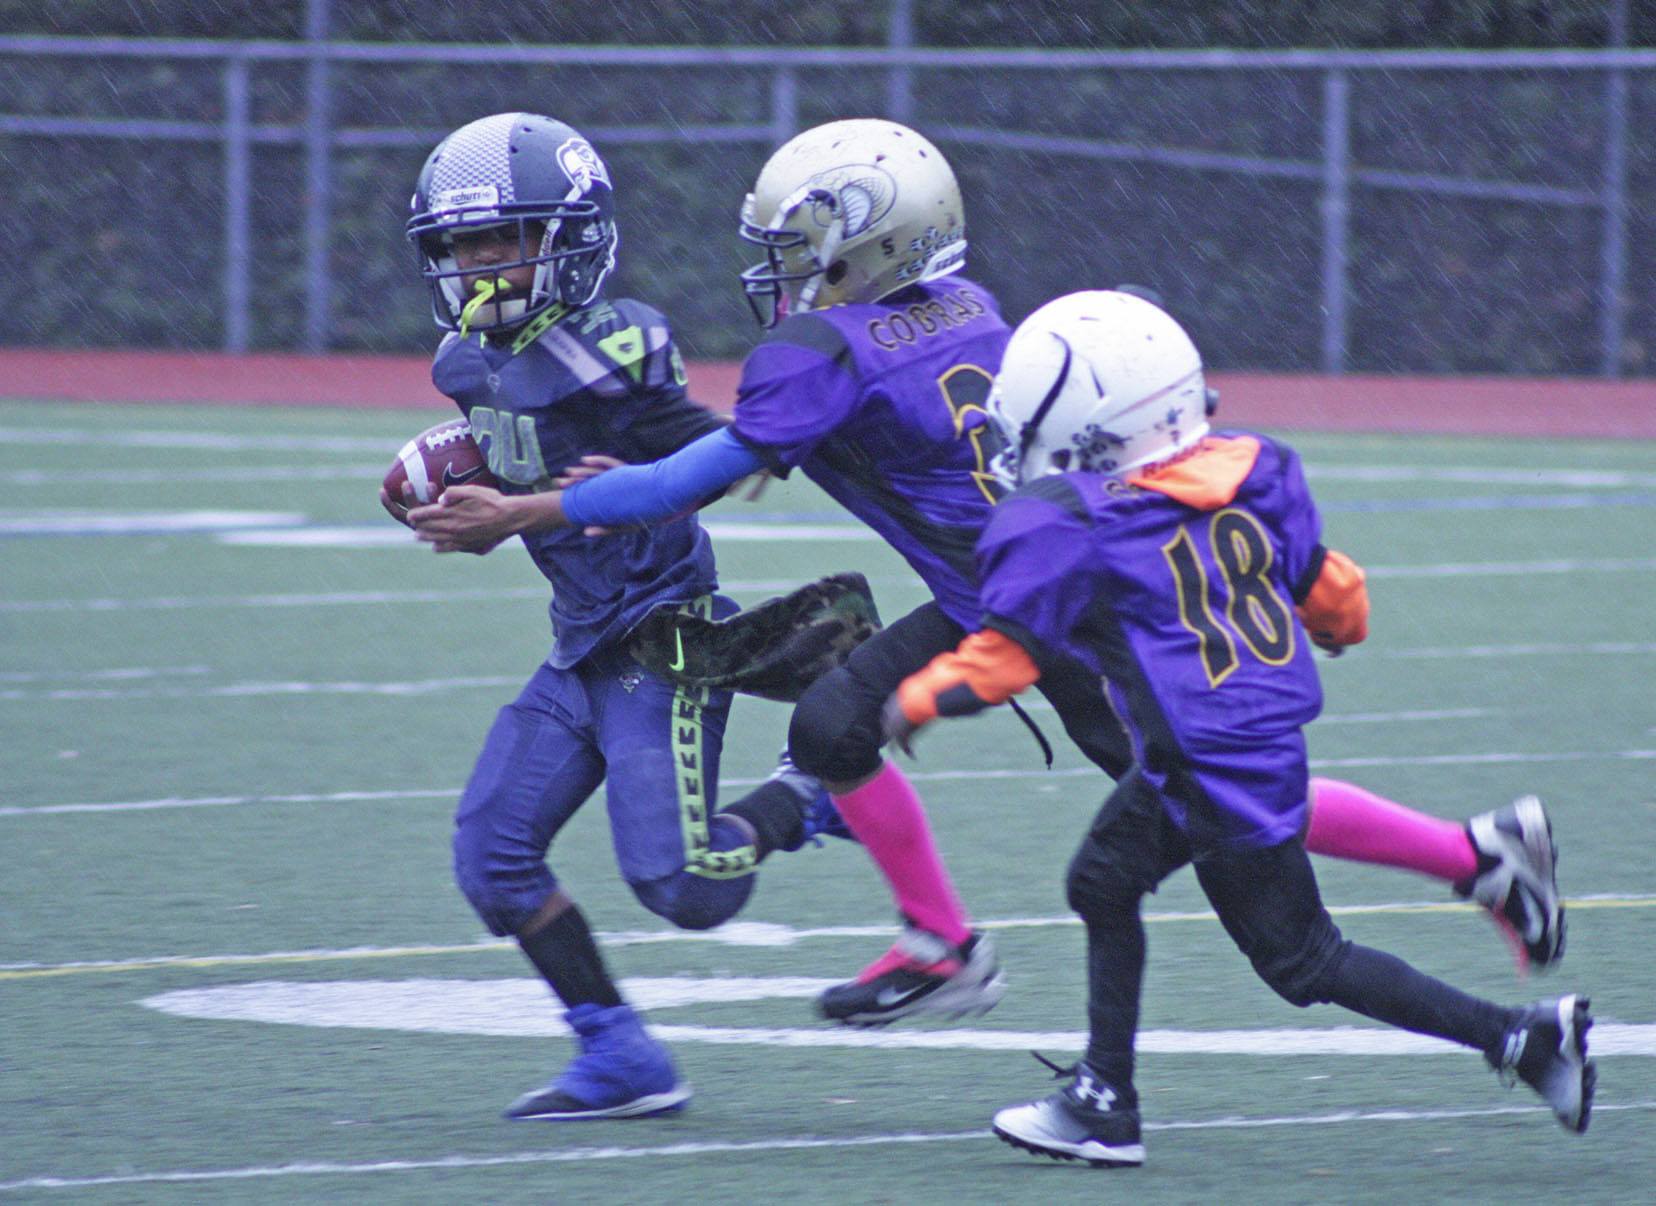 The Kent Cobras' J'Isaiah Mitchell (3) and Aalonzo Coe (18) pursue the Seattle Junior Seahawks' Marquisse Belgarde during pee wee youth division football play at French Field last Saturday. MARK KLAAS